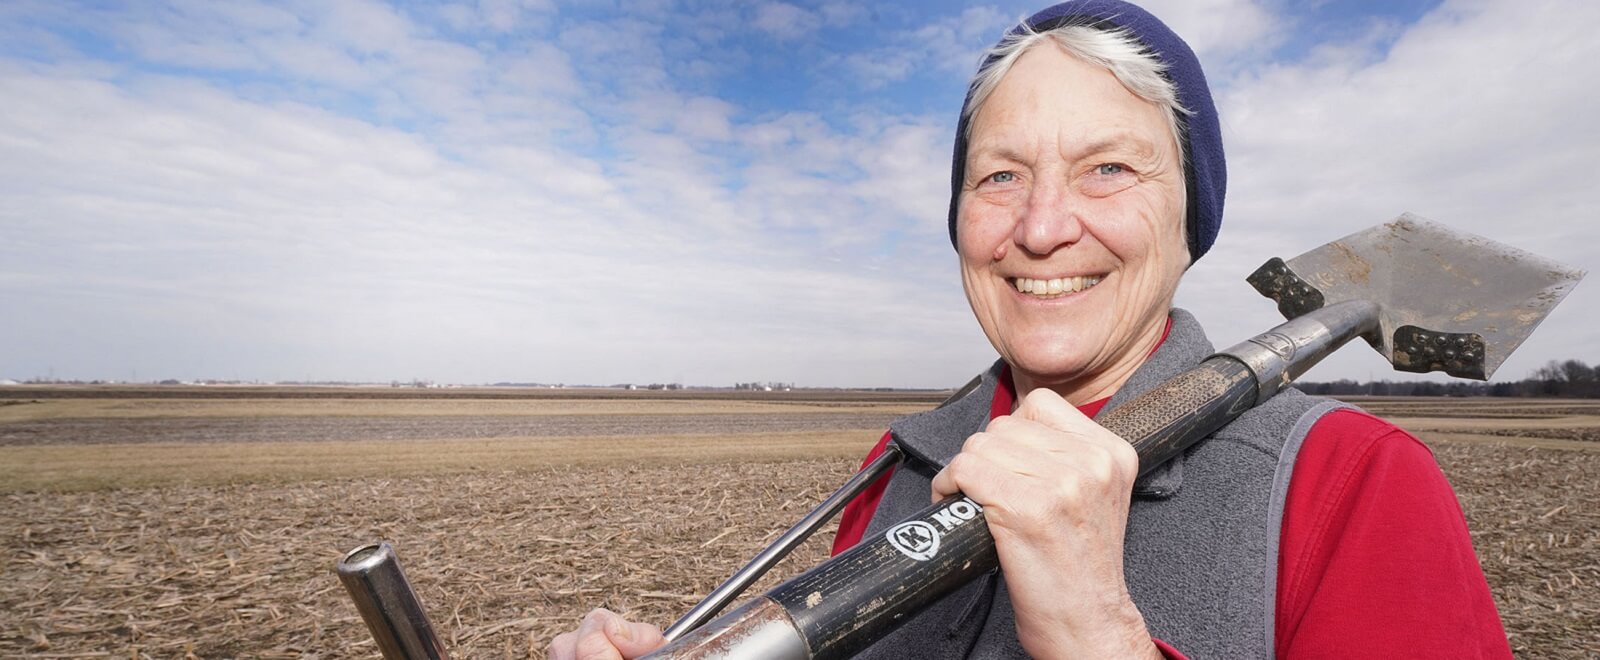 Kladivko smiling as she hold a farming tools resting on her shoulder (outdoors on a cornfield). 